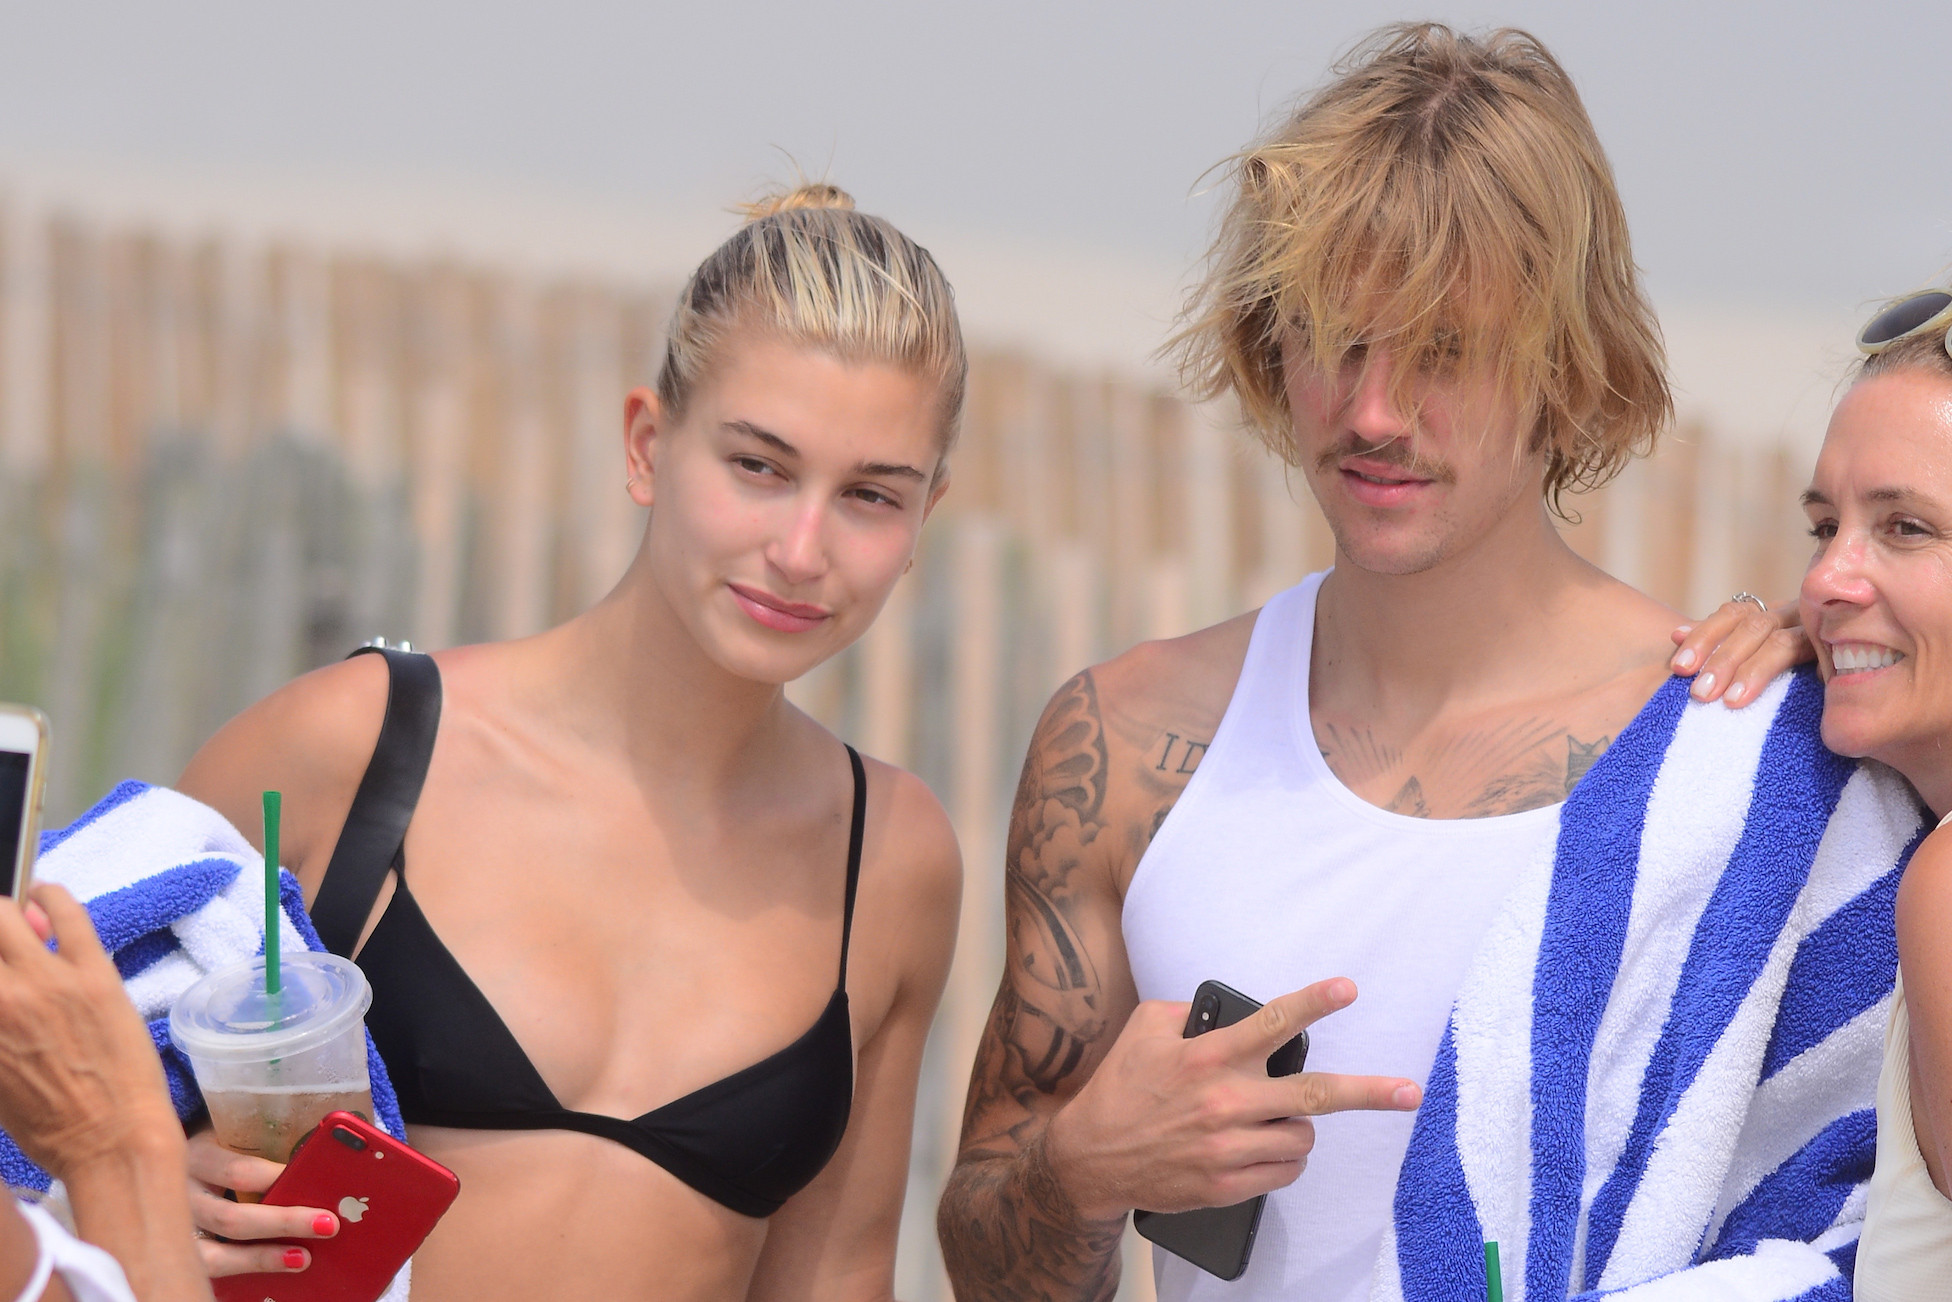 Justin Bieber And Hailey Baldwin Are Off To Bahamas Escaping The Selena Gomez Drama